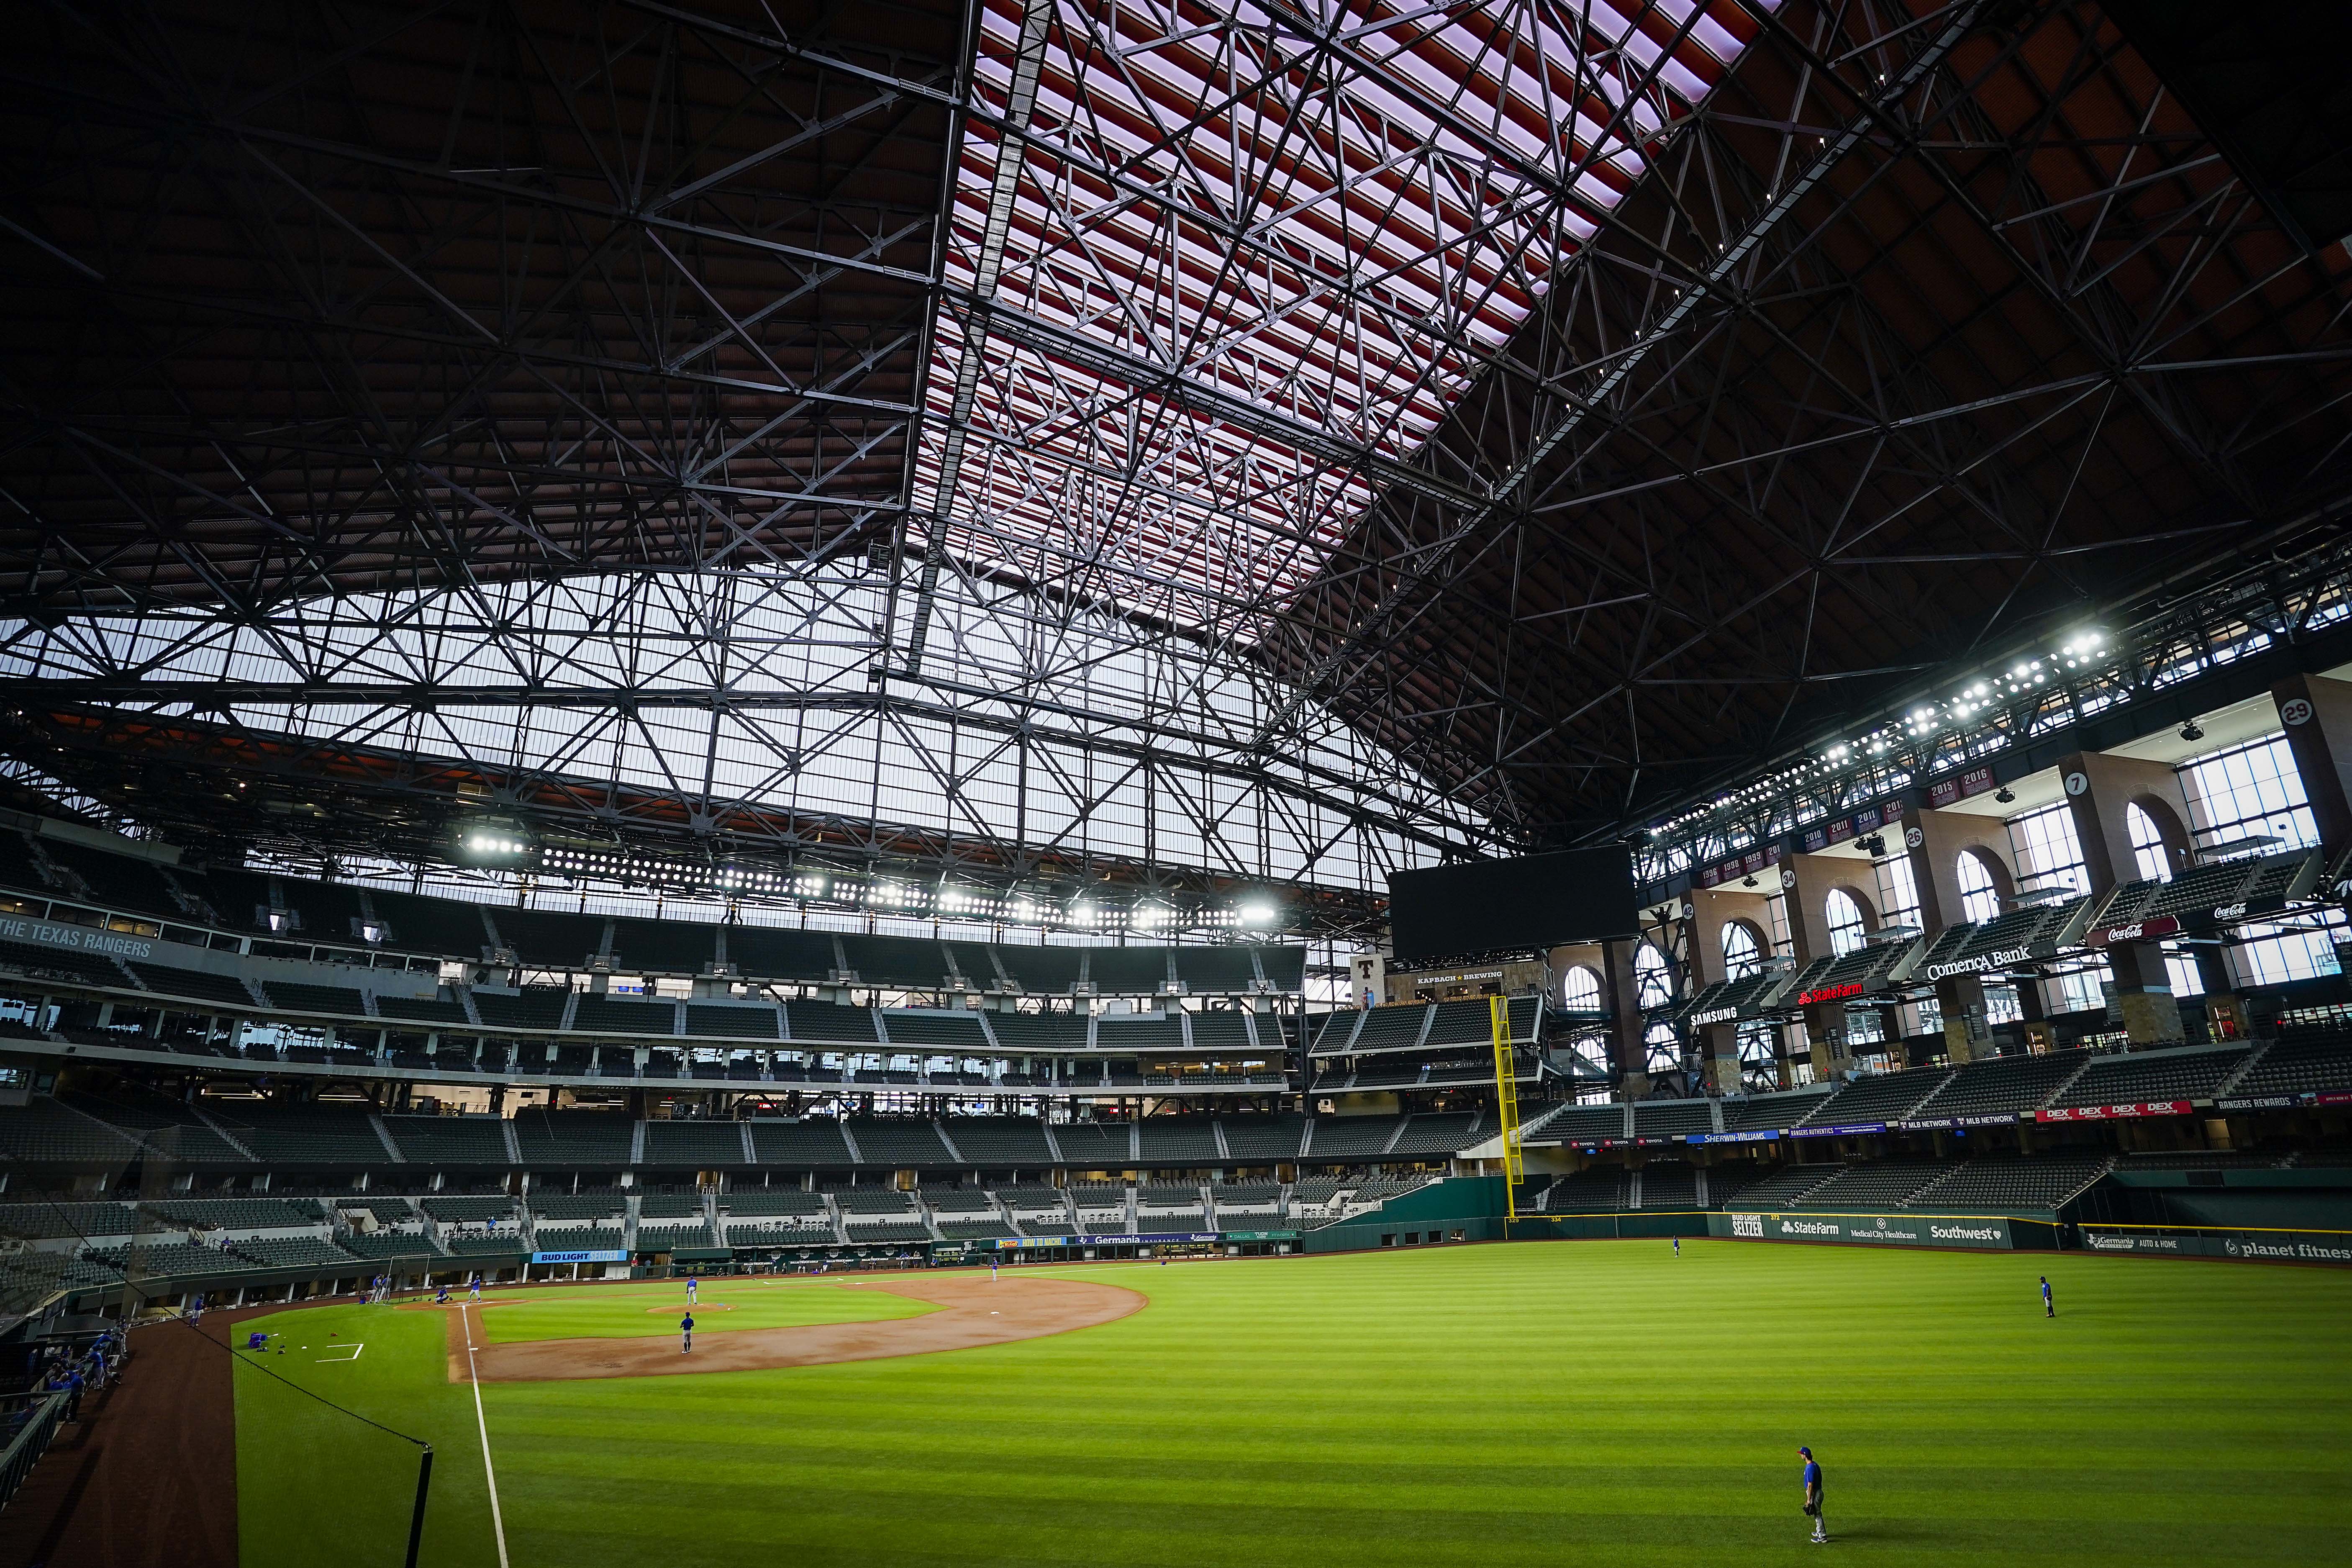 Home, sweet home: Inside advantages the Rangers will receive when playing  at Globe Life Field